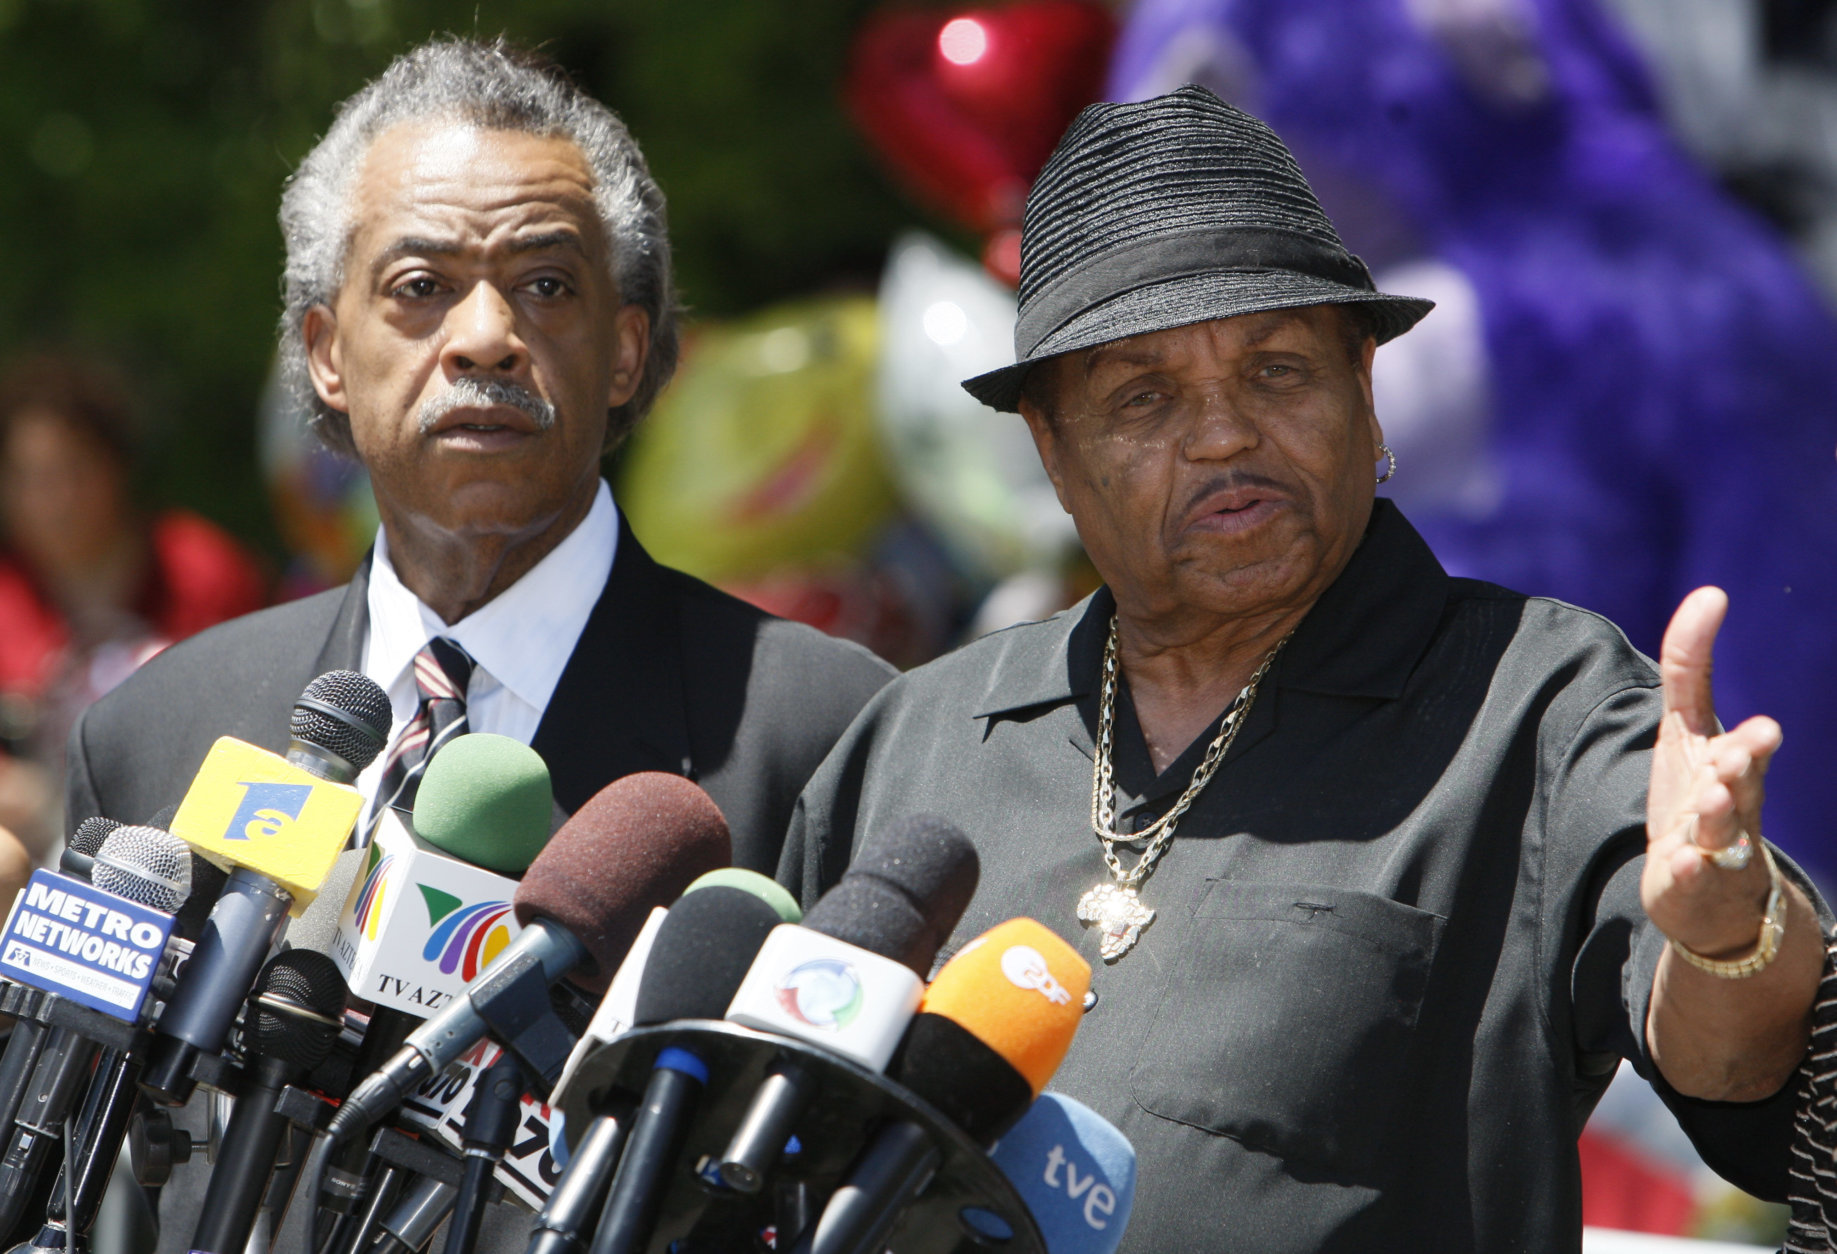 Rev. Al Sharpton and Joe Jackson, Michael Jackson's father, speak at a news conference in front of the the Jackson family residence in Encino, Calif., Monday, June 29, 2009.  (AP Photo/Charles Dharapak)